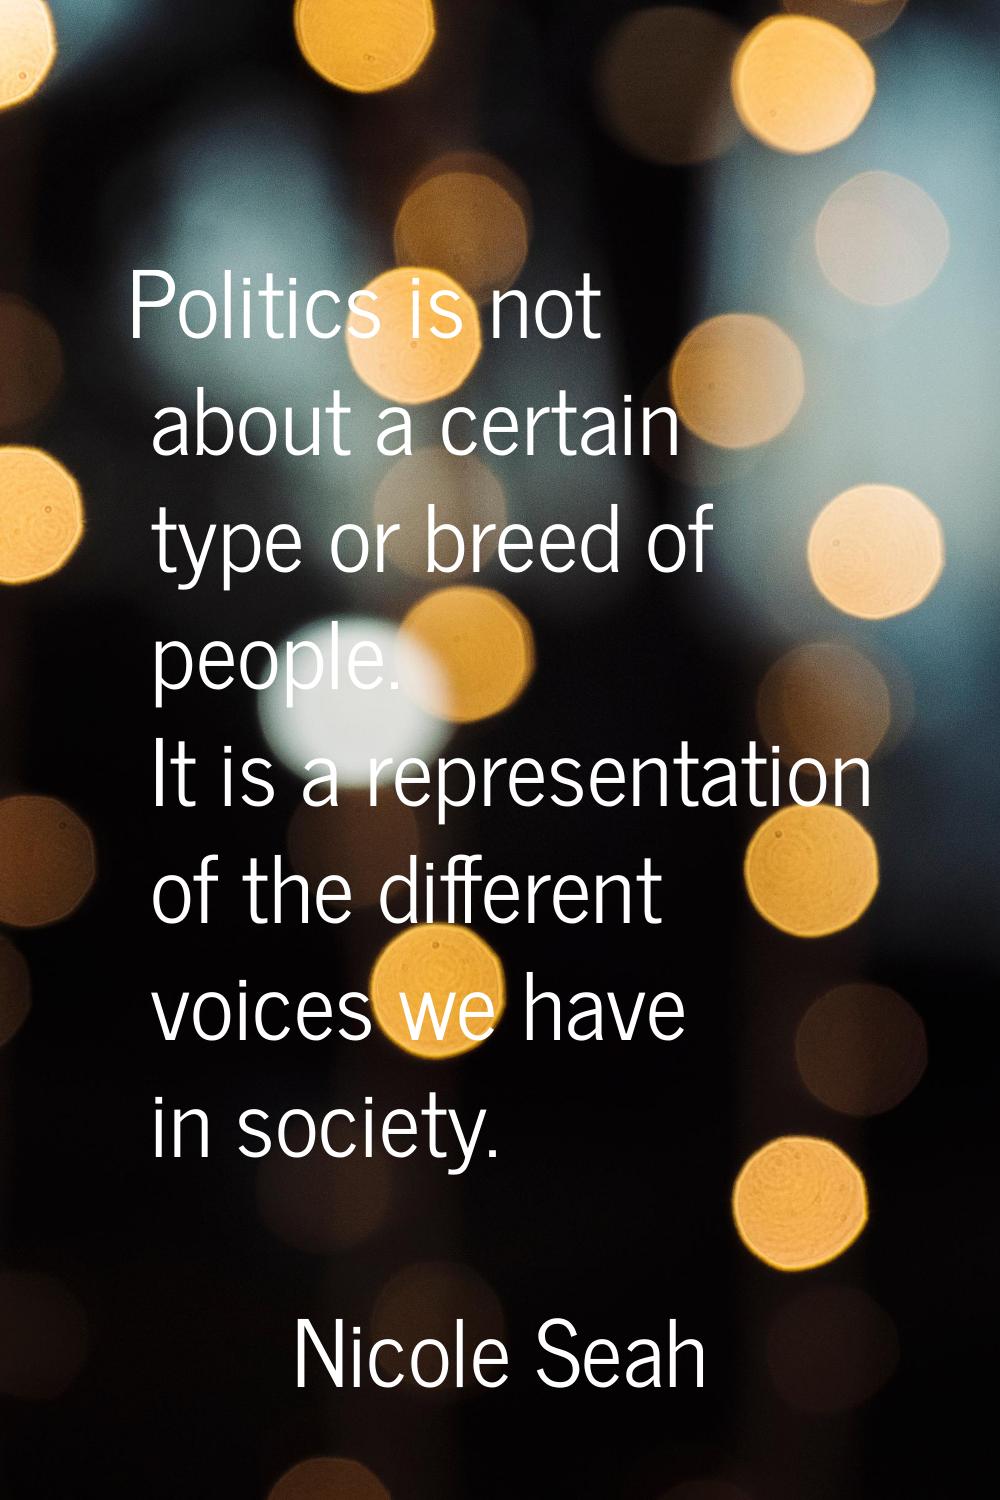 Politics is not about a certain type or breed of people. It is a representation of the different vo